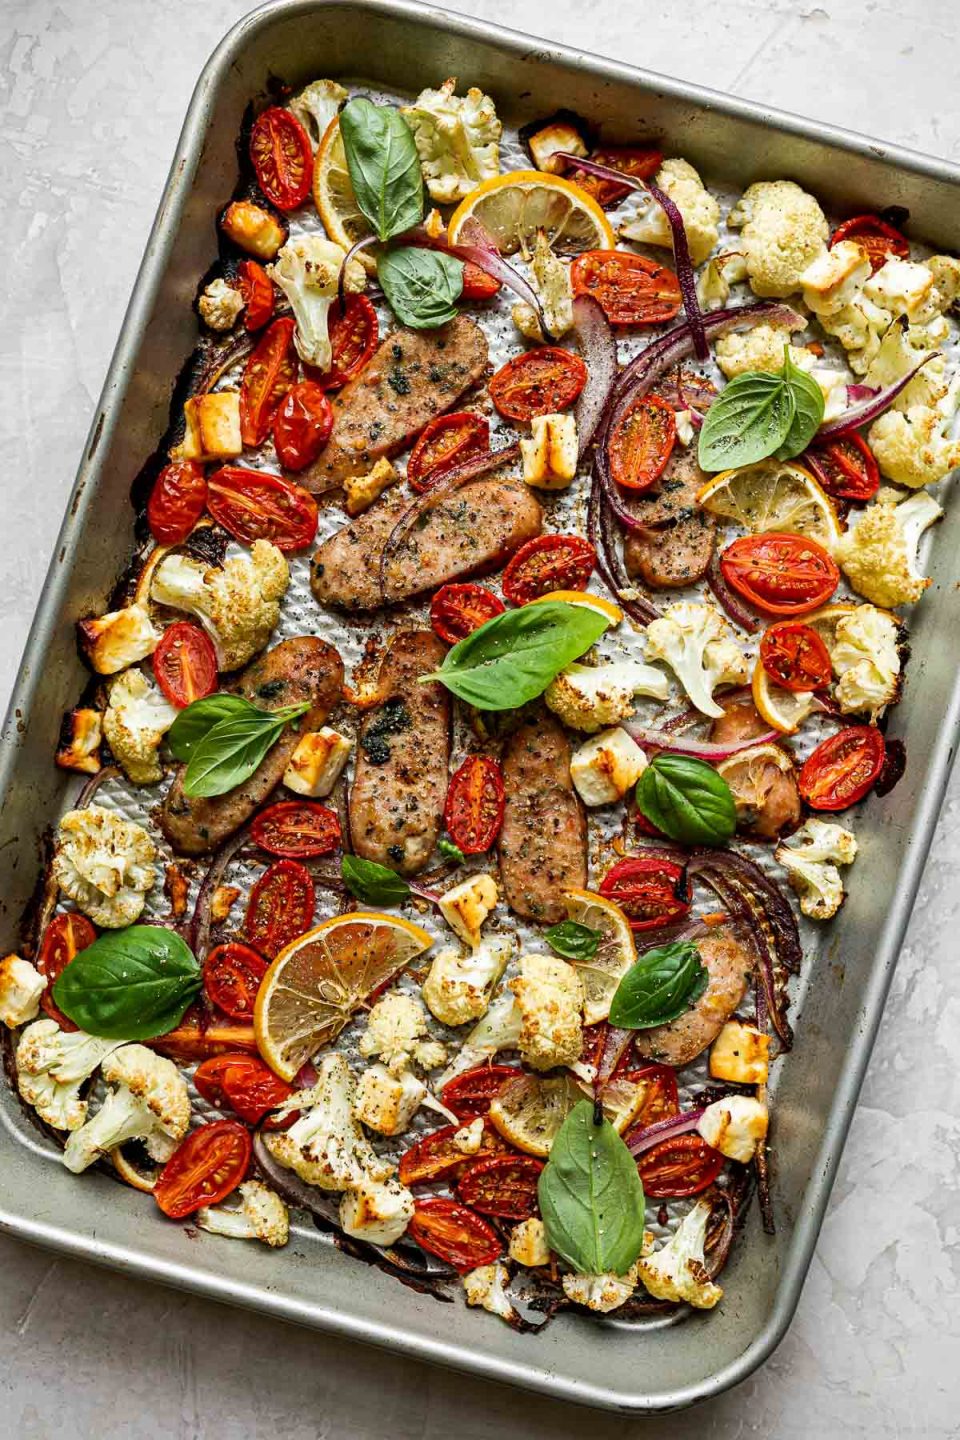 Baked Sheet Pan Chicken Sausage and Veggies on a silver quarter sheet pan atop a creamy cement surface. The sheet pan is topped with fresh basil leaves & ground black pepper.